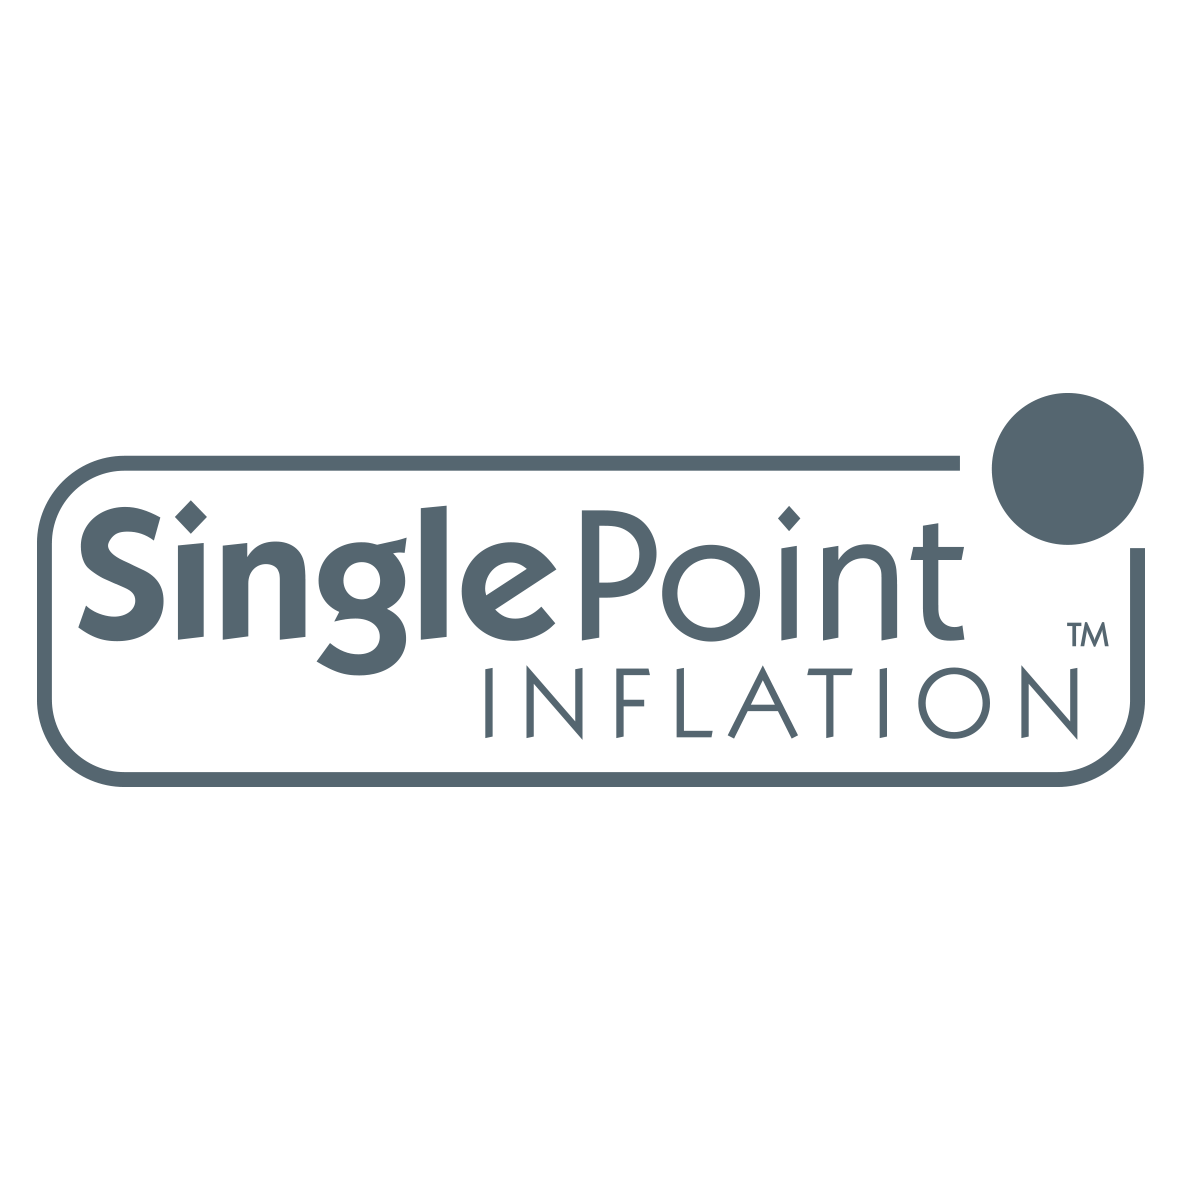 Single Point Inflation Logo Charcoal